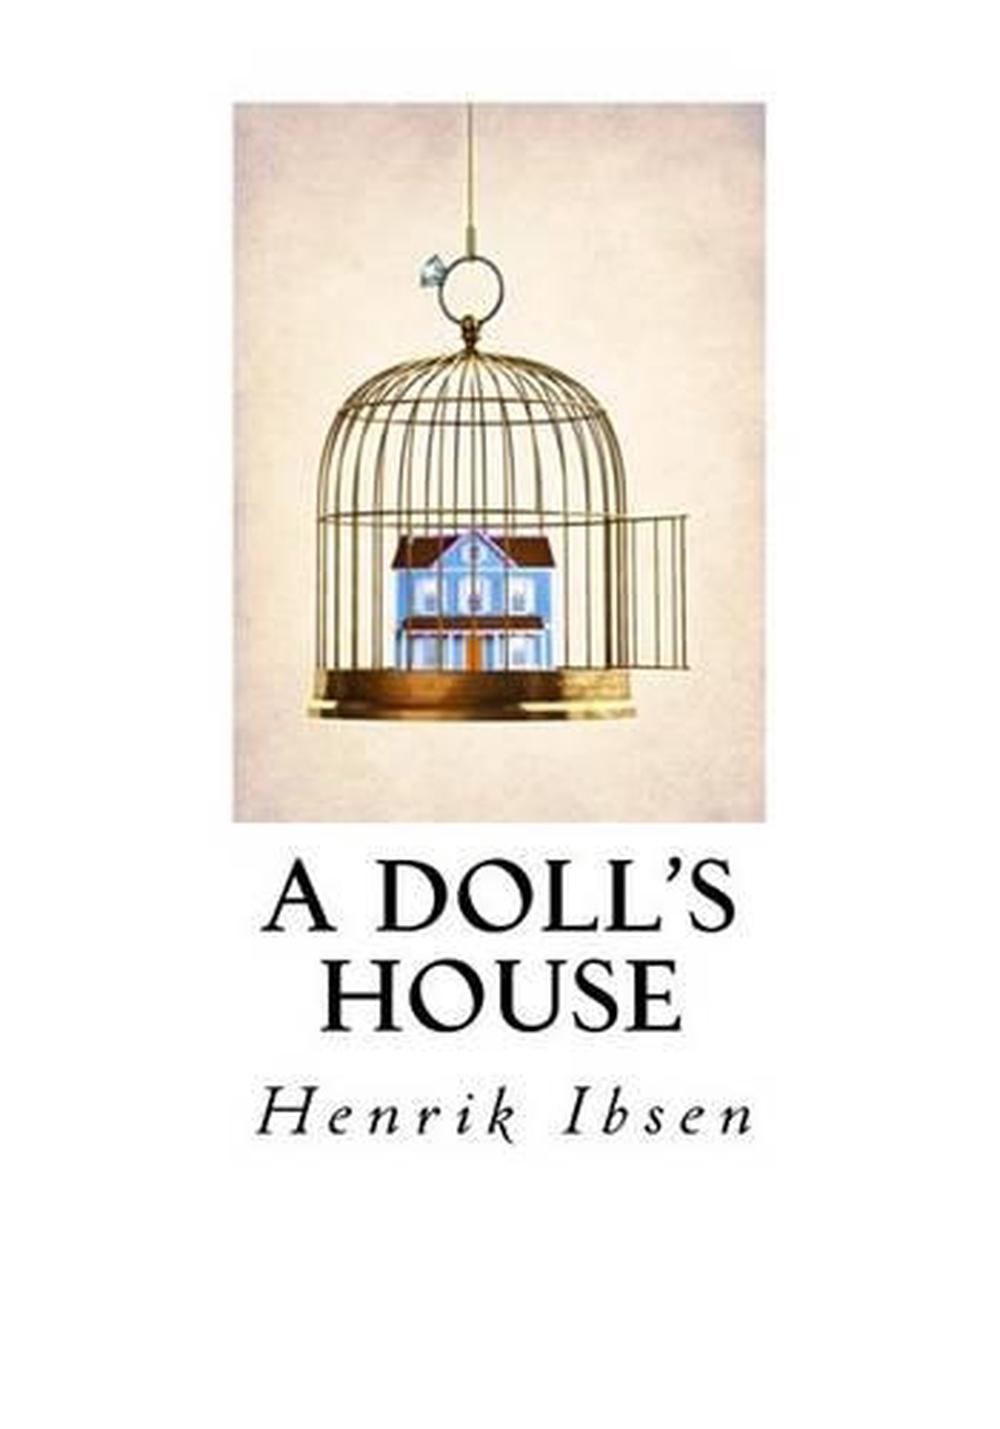 how to write a book review of a doll's house